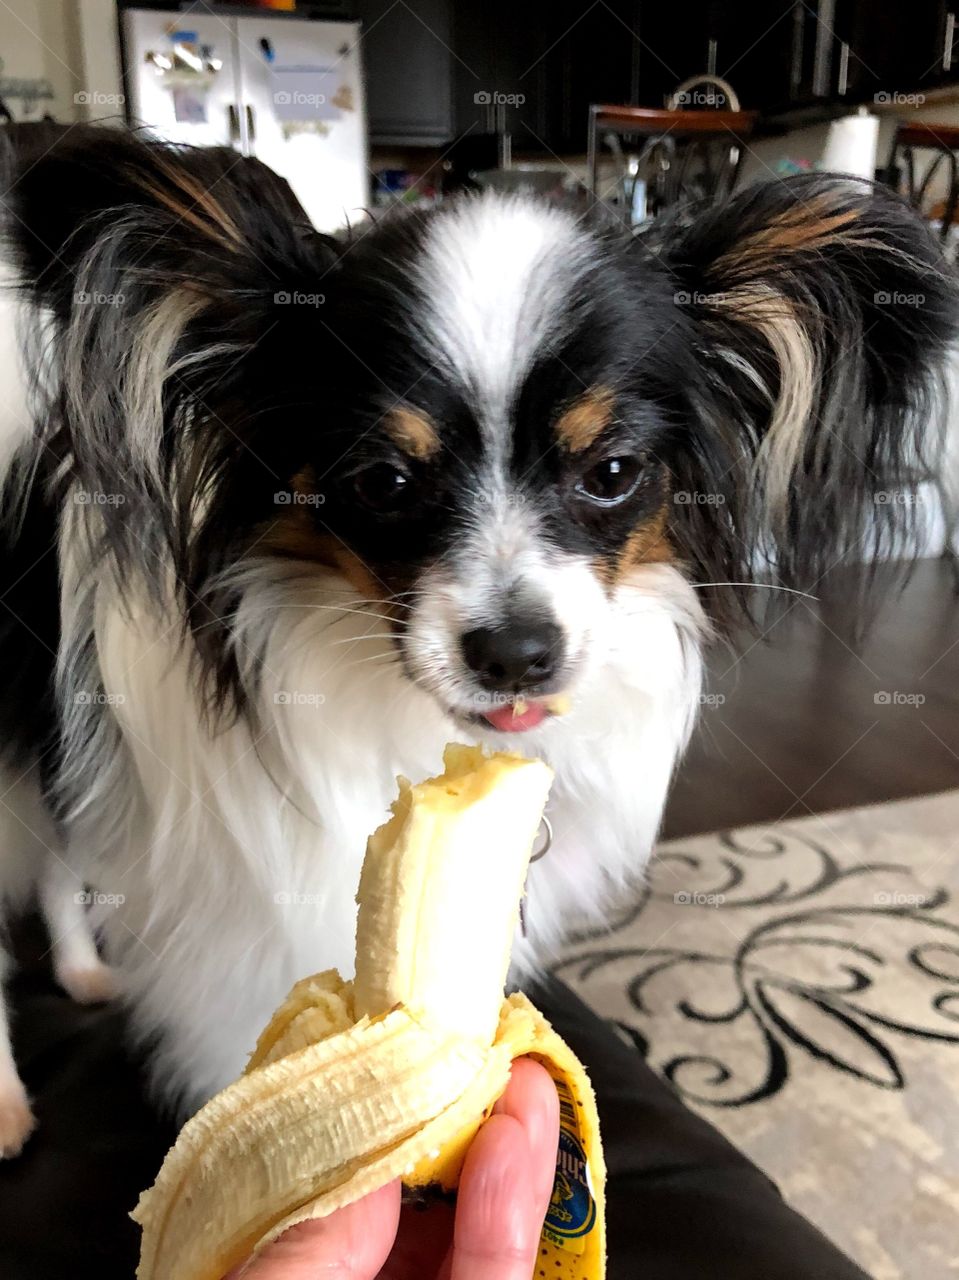 This is my banana